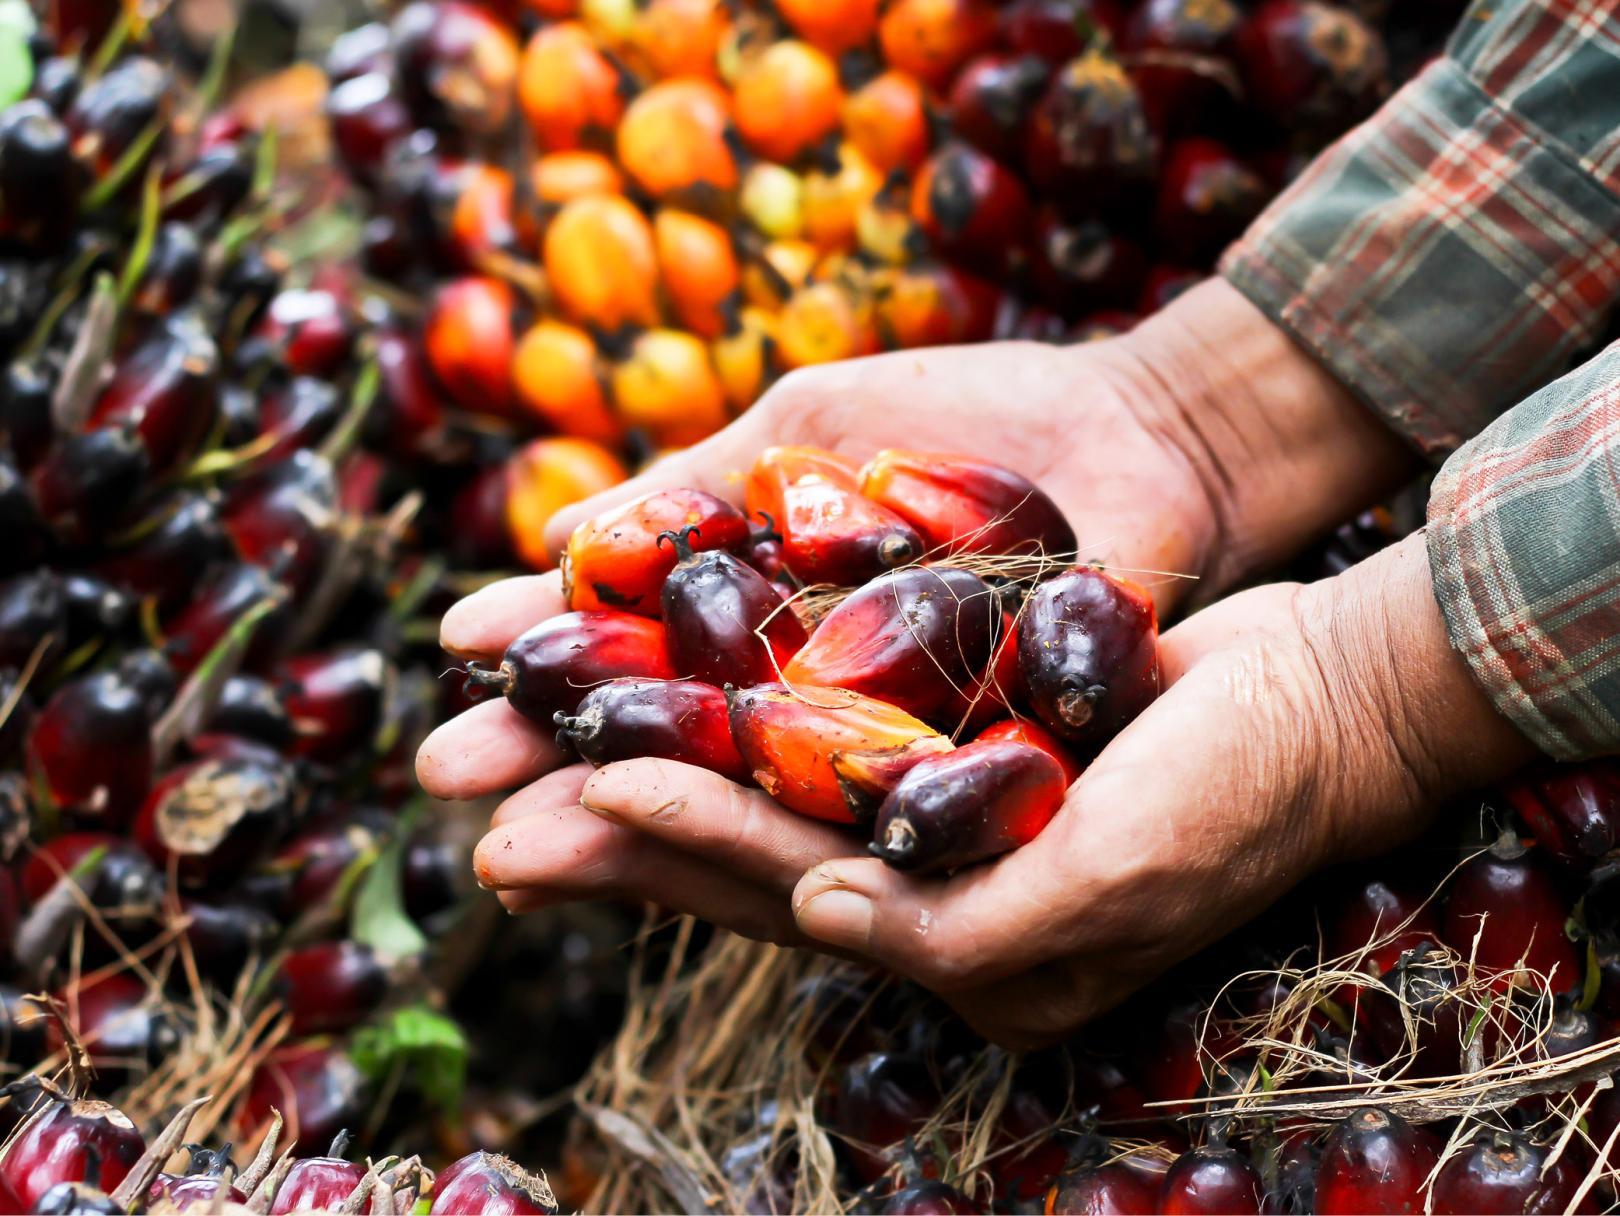 Image of palm oil